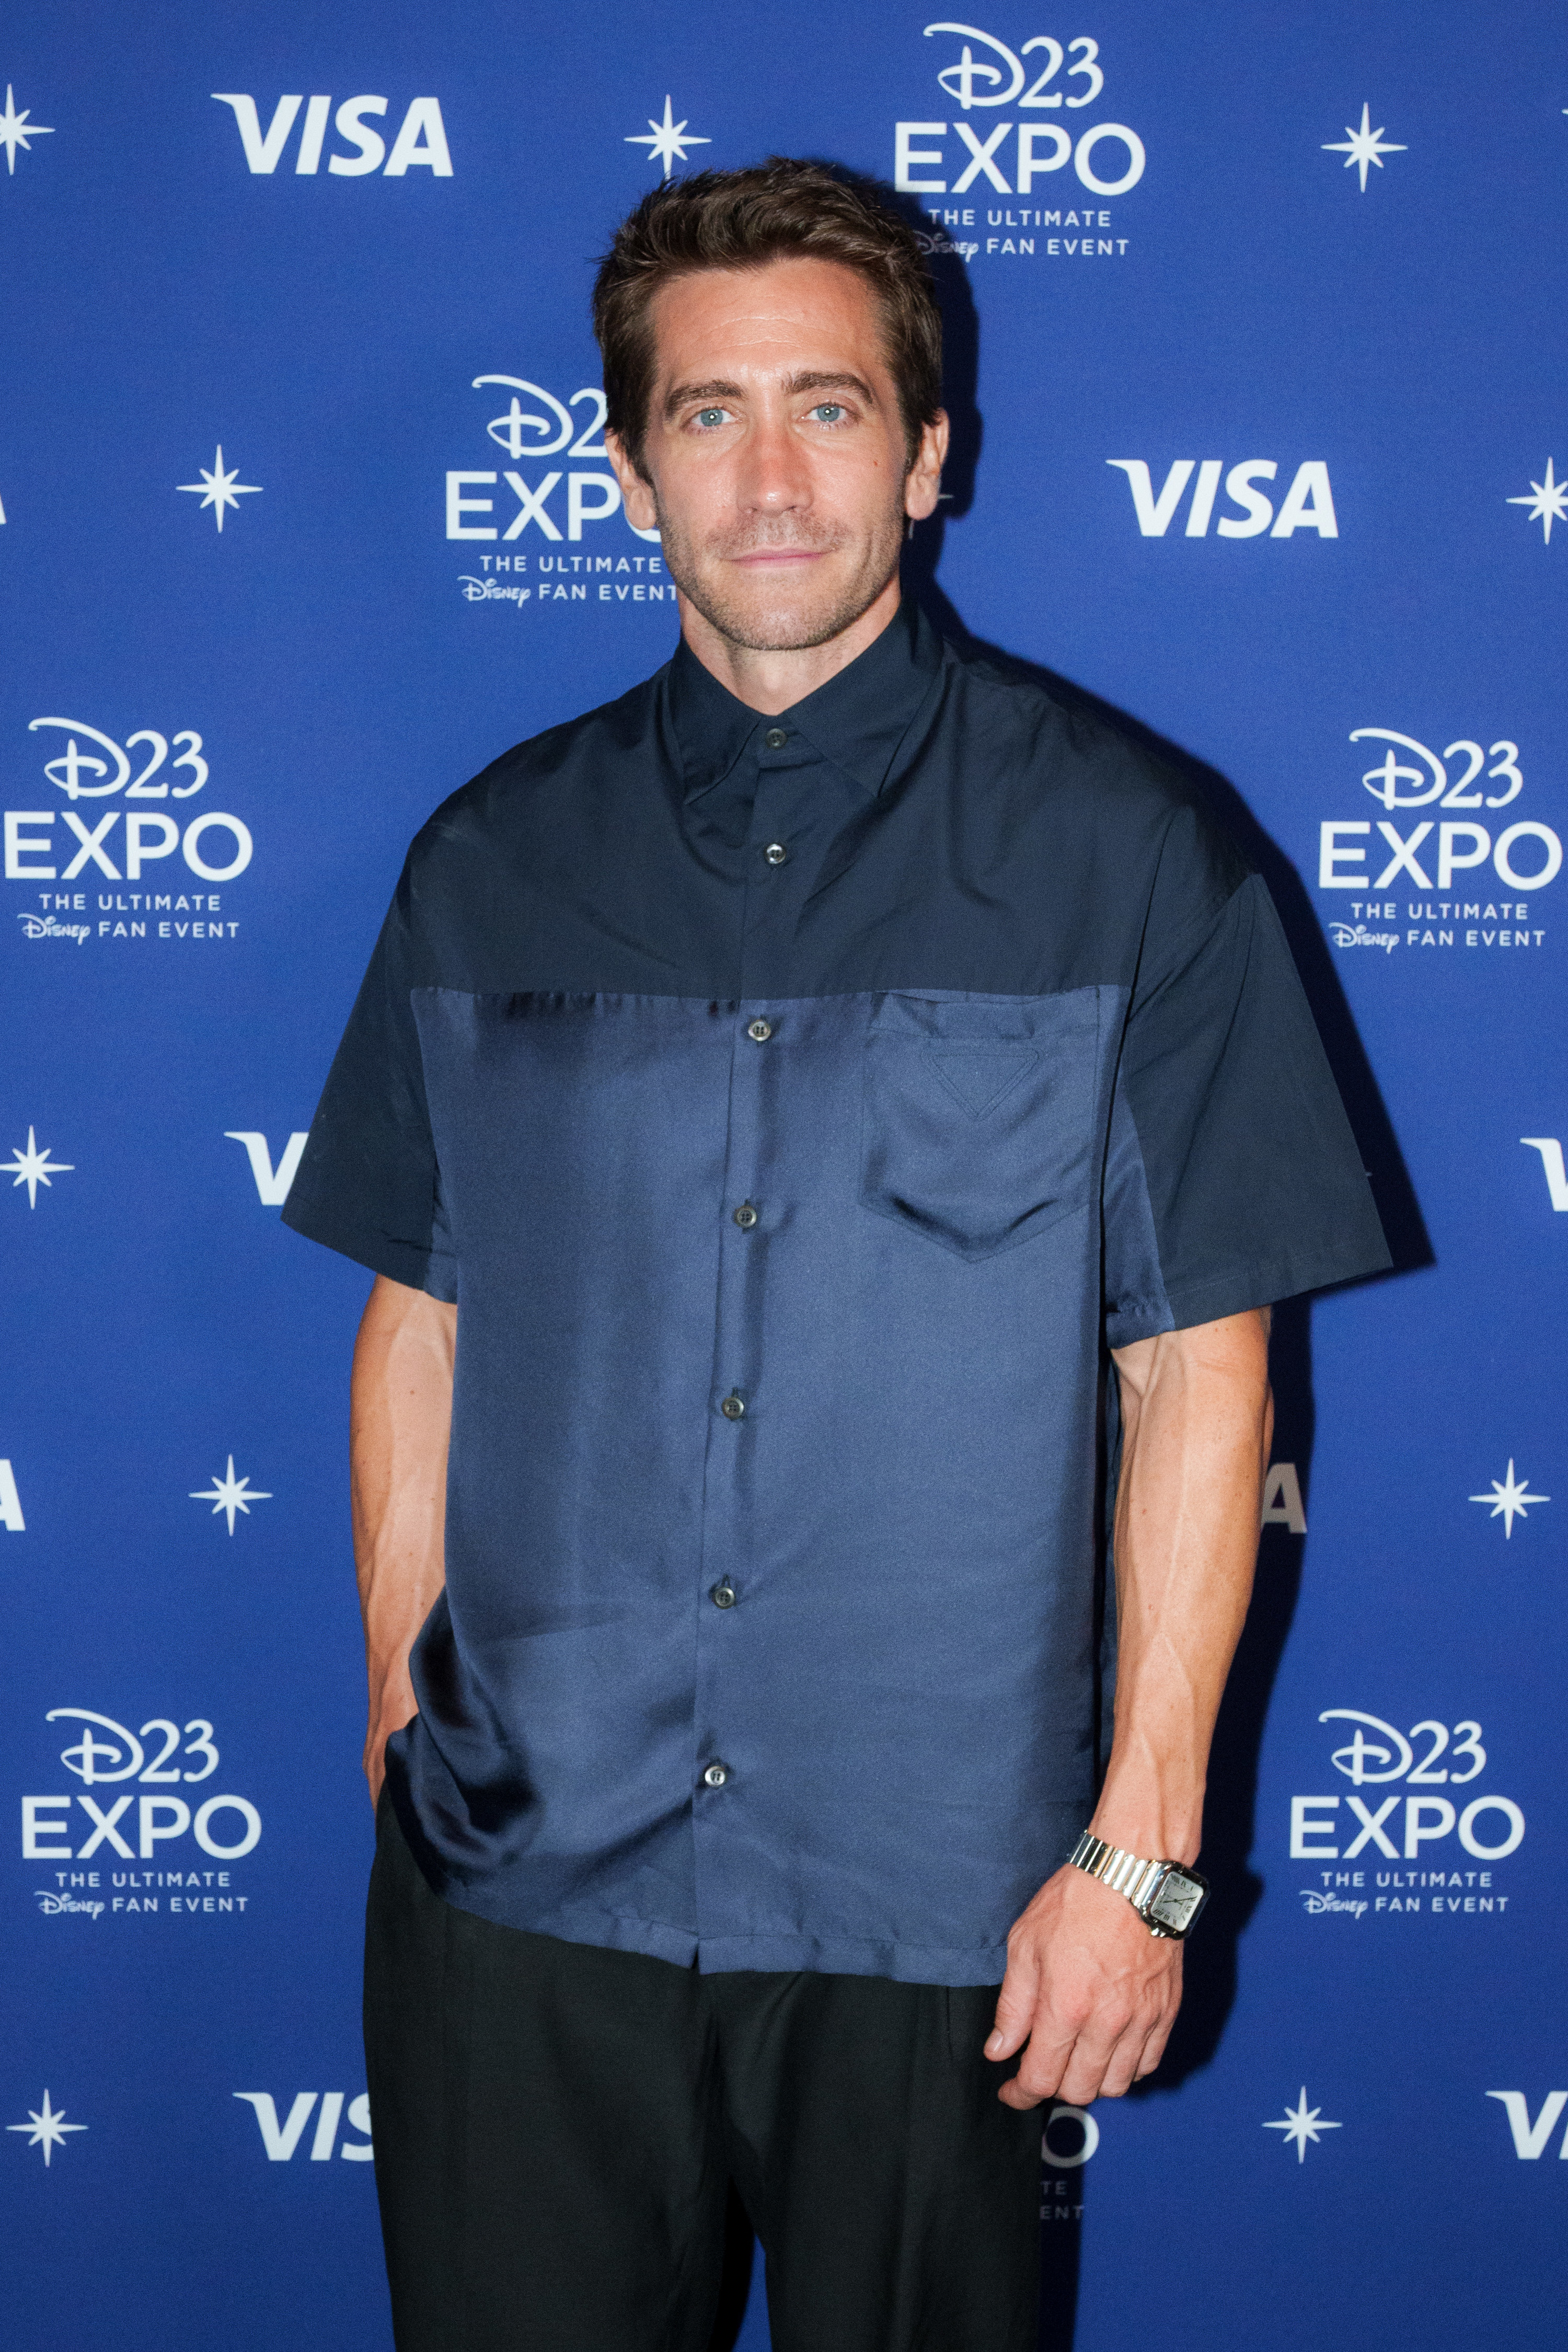 Gyllenhaal at the D23 Expo